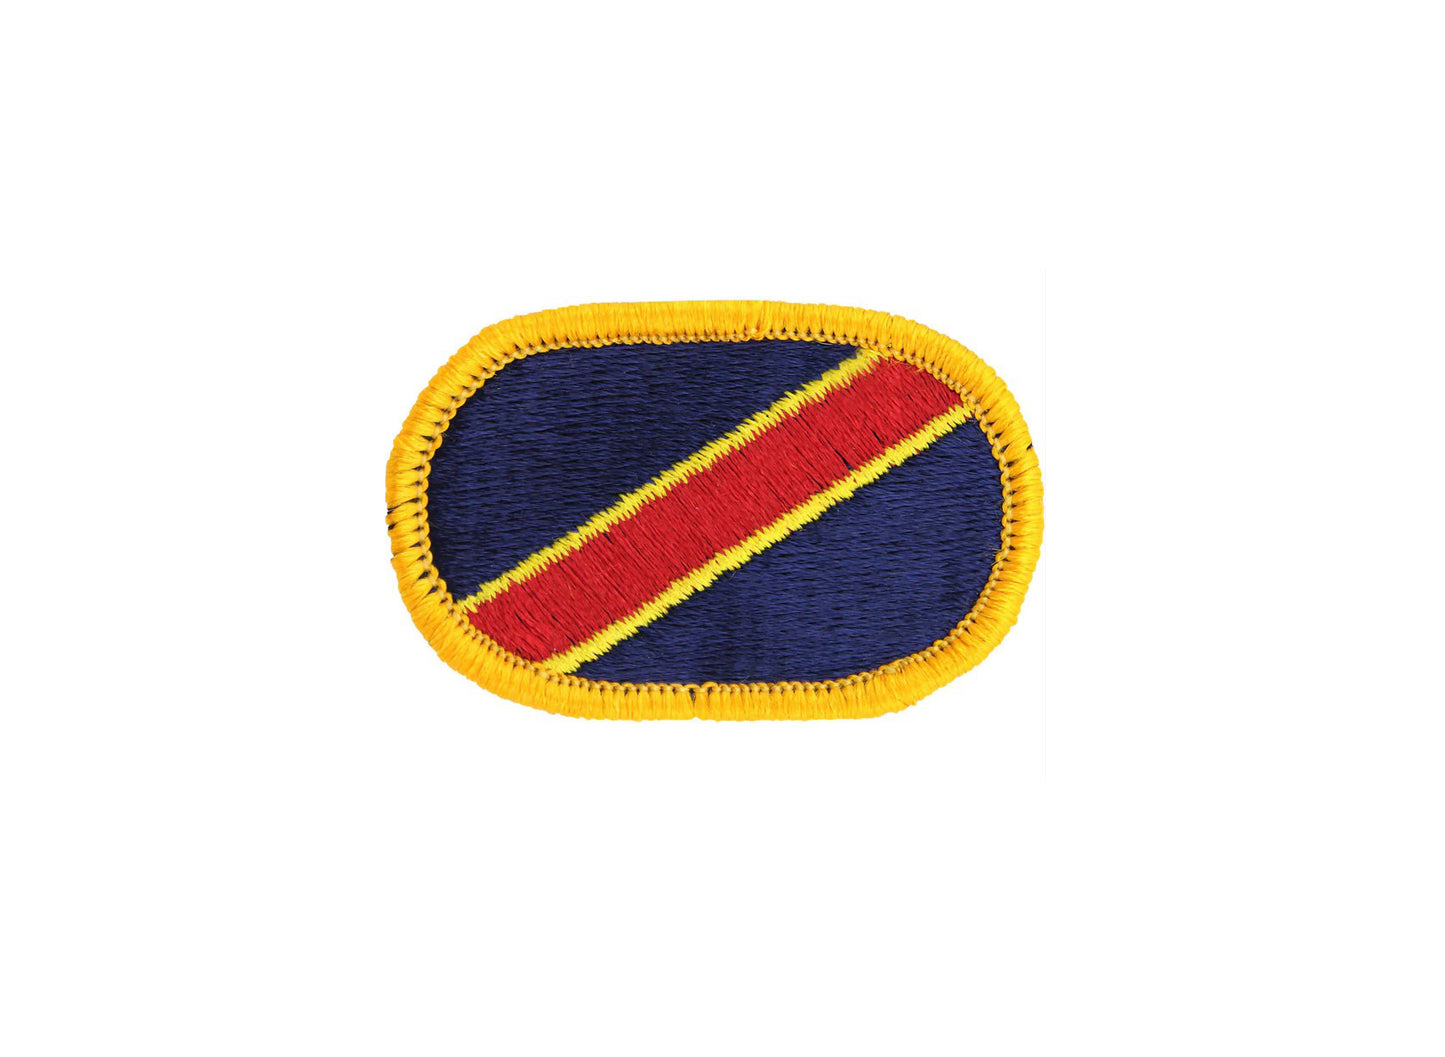 U.S. Army 18th Personnel Group Oval